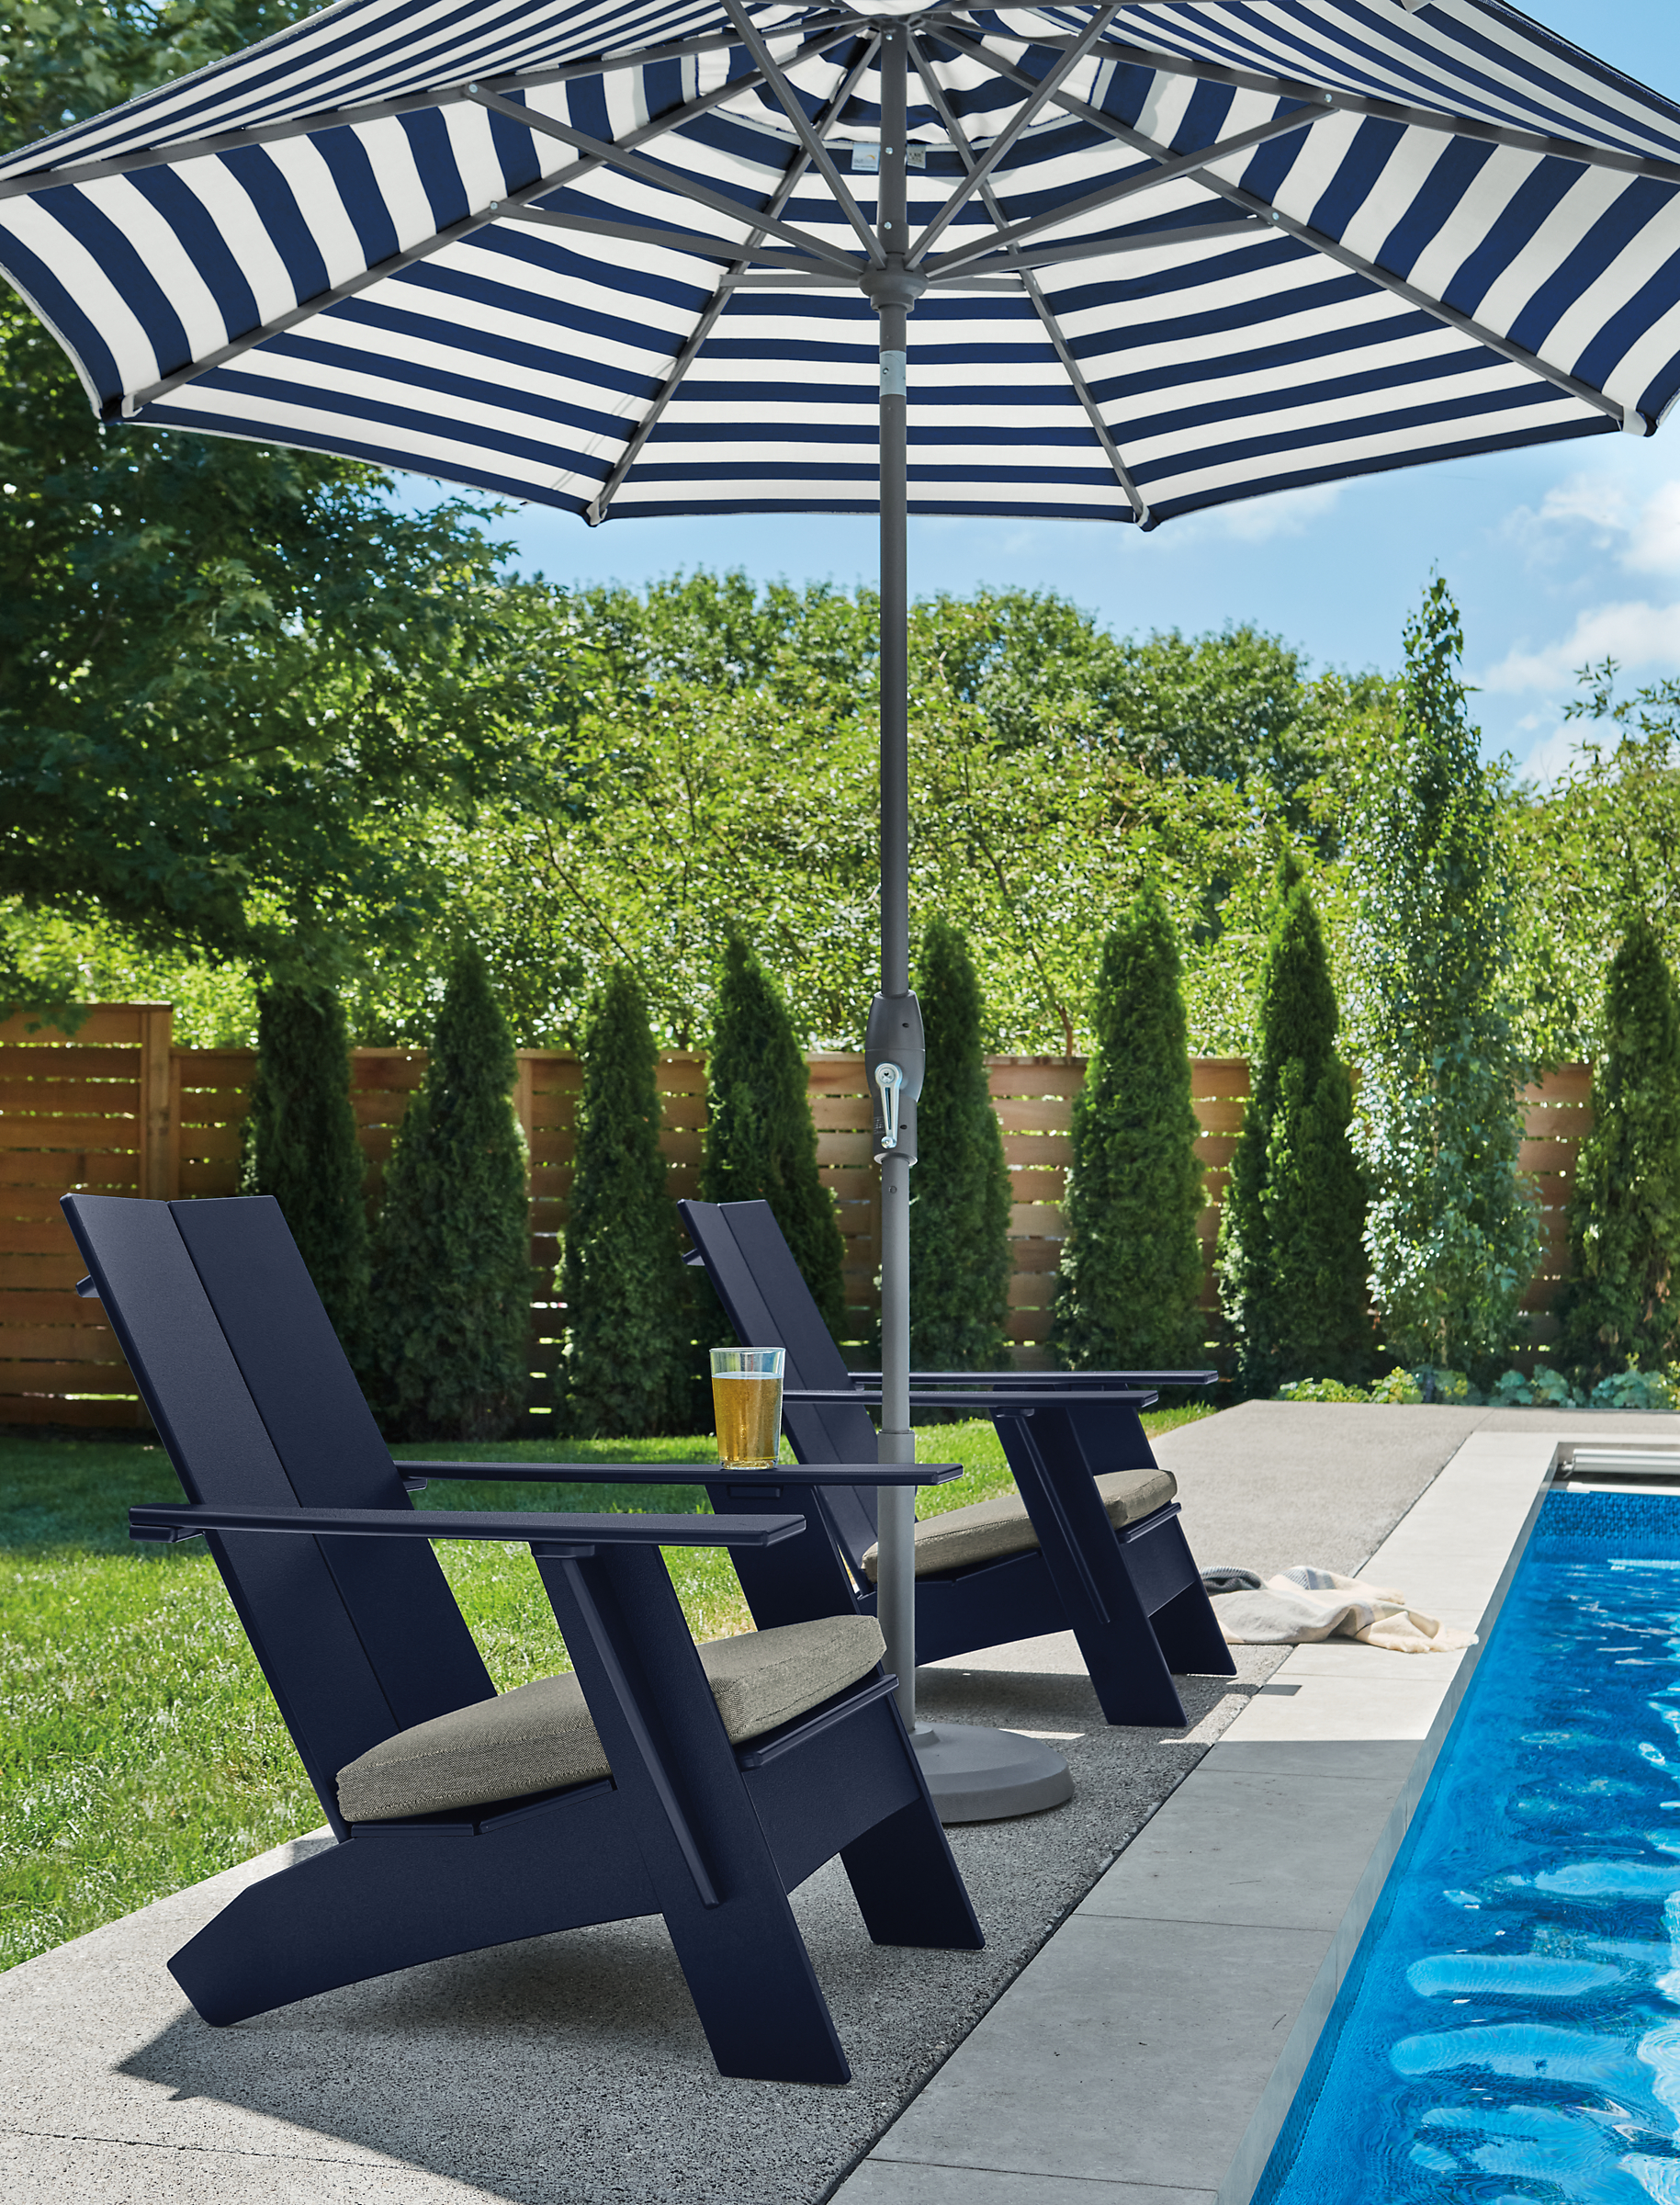 Two Emmet lounge chairs in Navy with Pelham grey fabric and Oahu 9-foot patio umbrella in Watts navy.